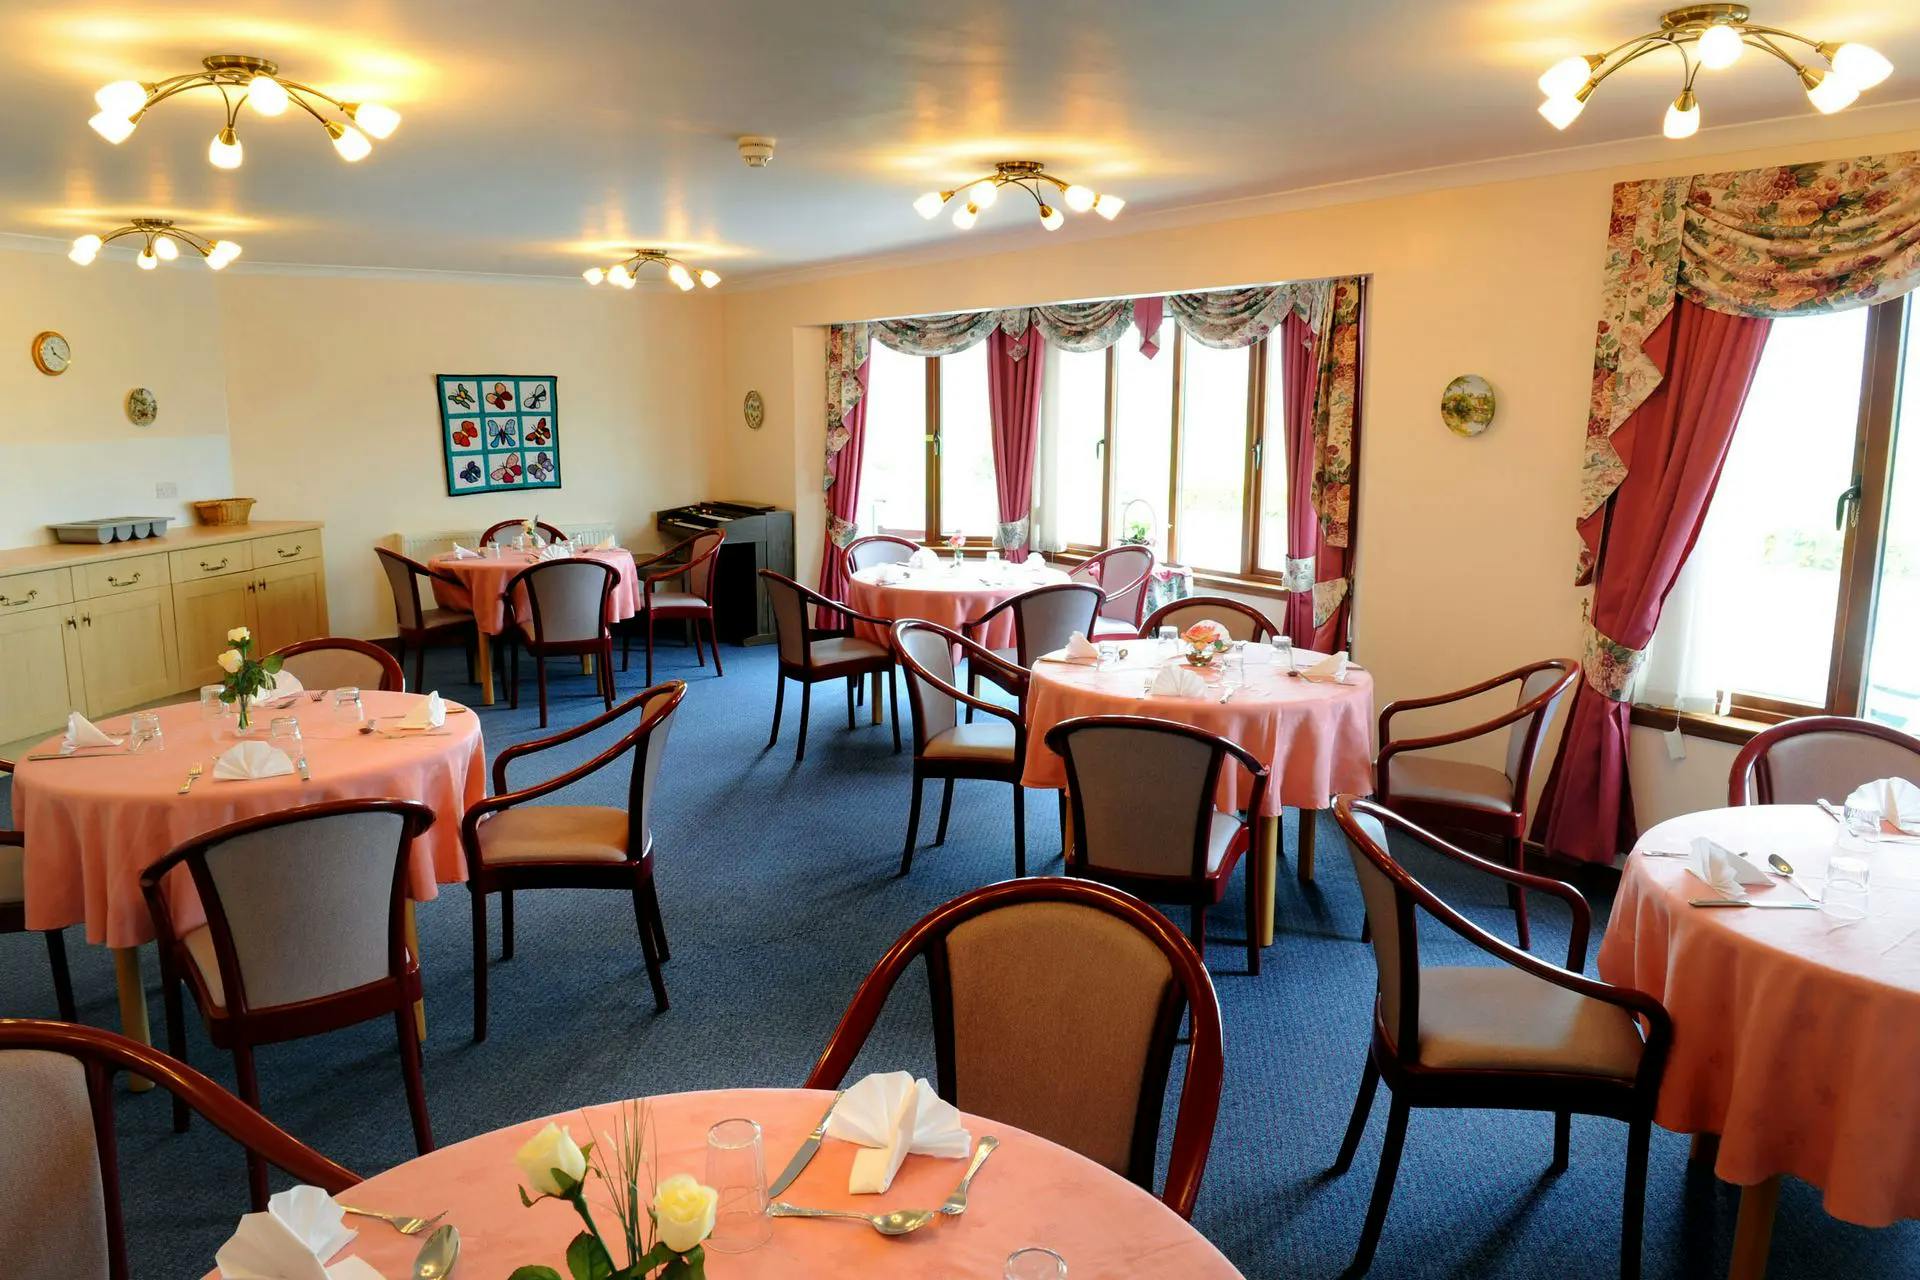 Dining room of Strathview care home in Fife, Scotland